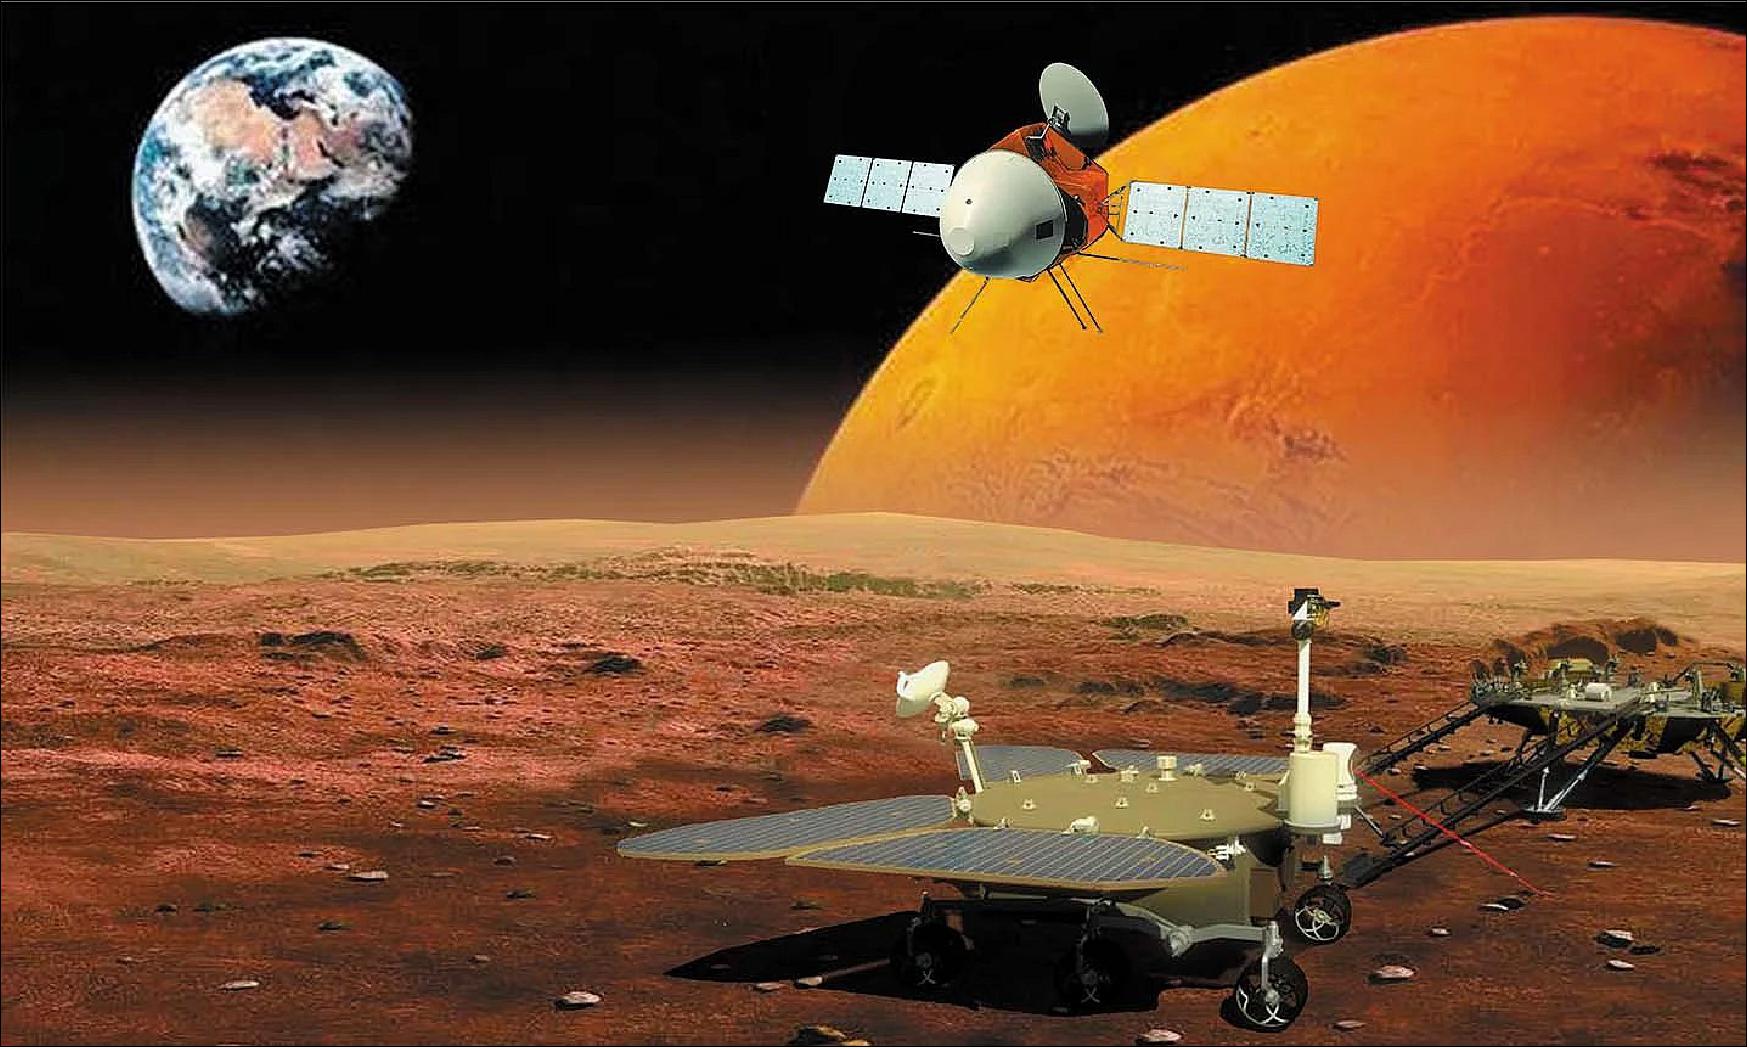 Figure 2: Artist’s impression of the Tianwen-1 mission. The mission will study the Red Planet with a combination of orbiter and lander/rover (image credit: CNSA)